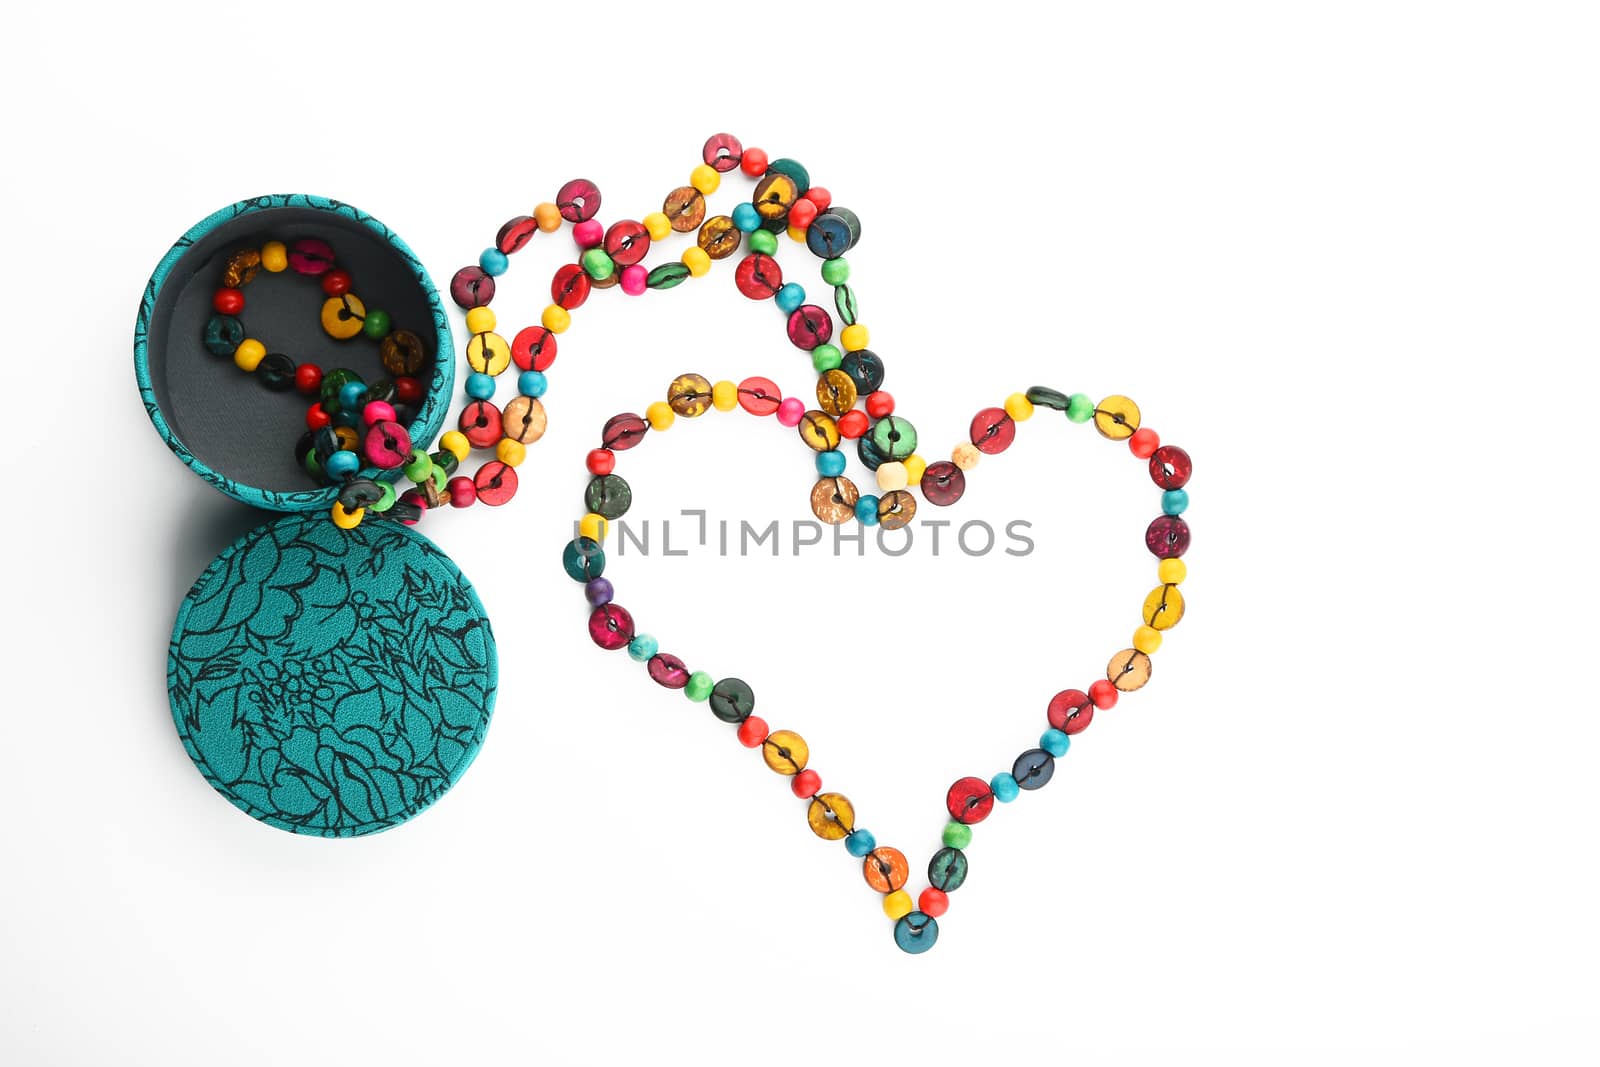 Heart shaped colorful handmade wooden round beads necklace partly taken out of jewelry box isolated on white